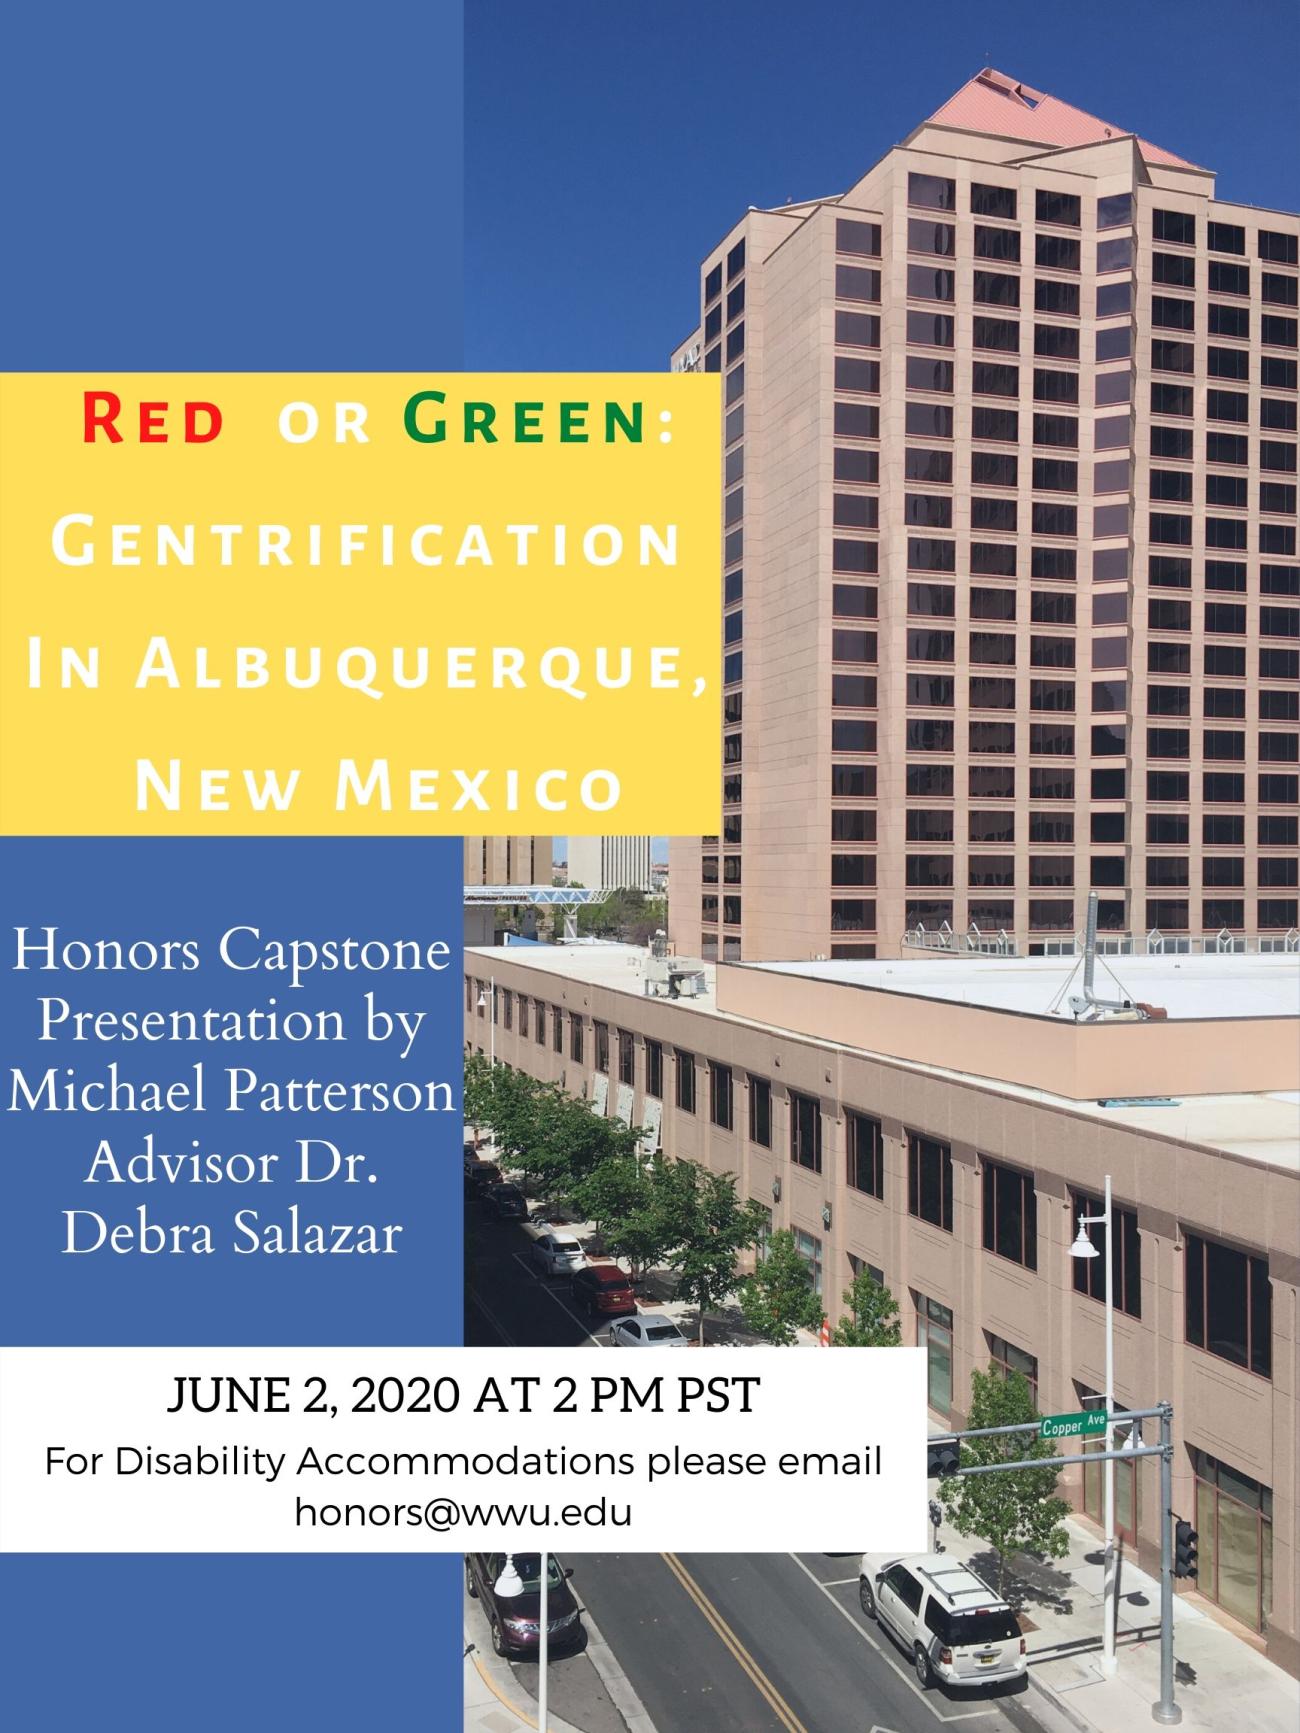 Image: Wide shot of Downtown Albuquerque's tallest building, the Bank of Albuquerque Tower. Text: "Red or Green: Gentrification in Albuquerque, New Mexico. Honors Capstone Presentation by Michael Patterson, Advisor Dr. Debra Salazar. June 2, 2020, 2 PM PST. For disability accommodations please call (360) 650-3034."